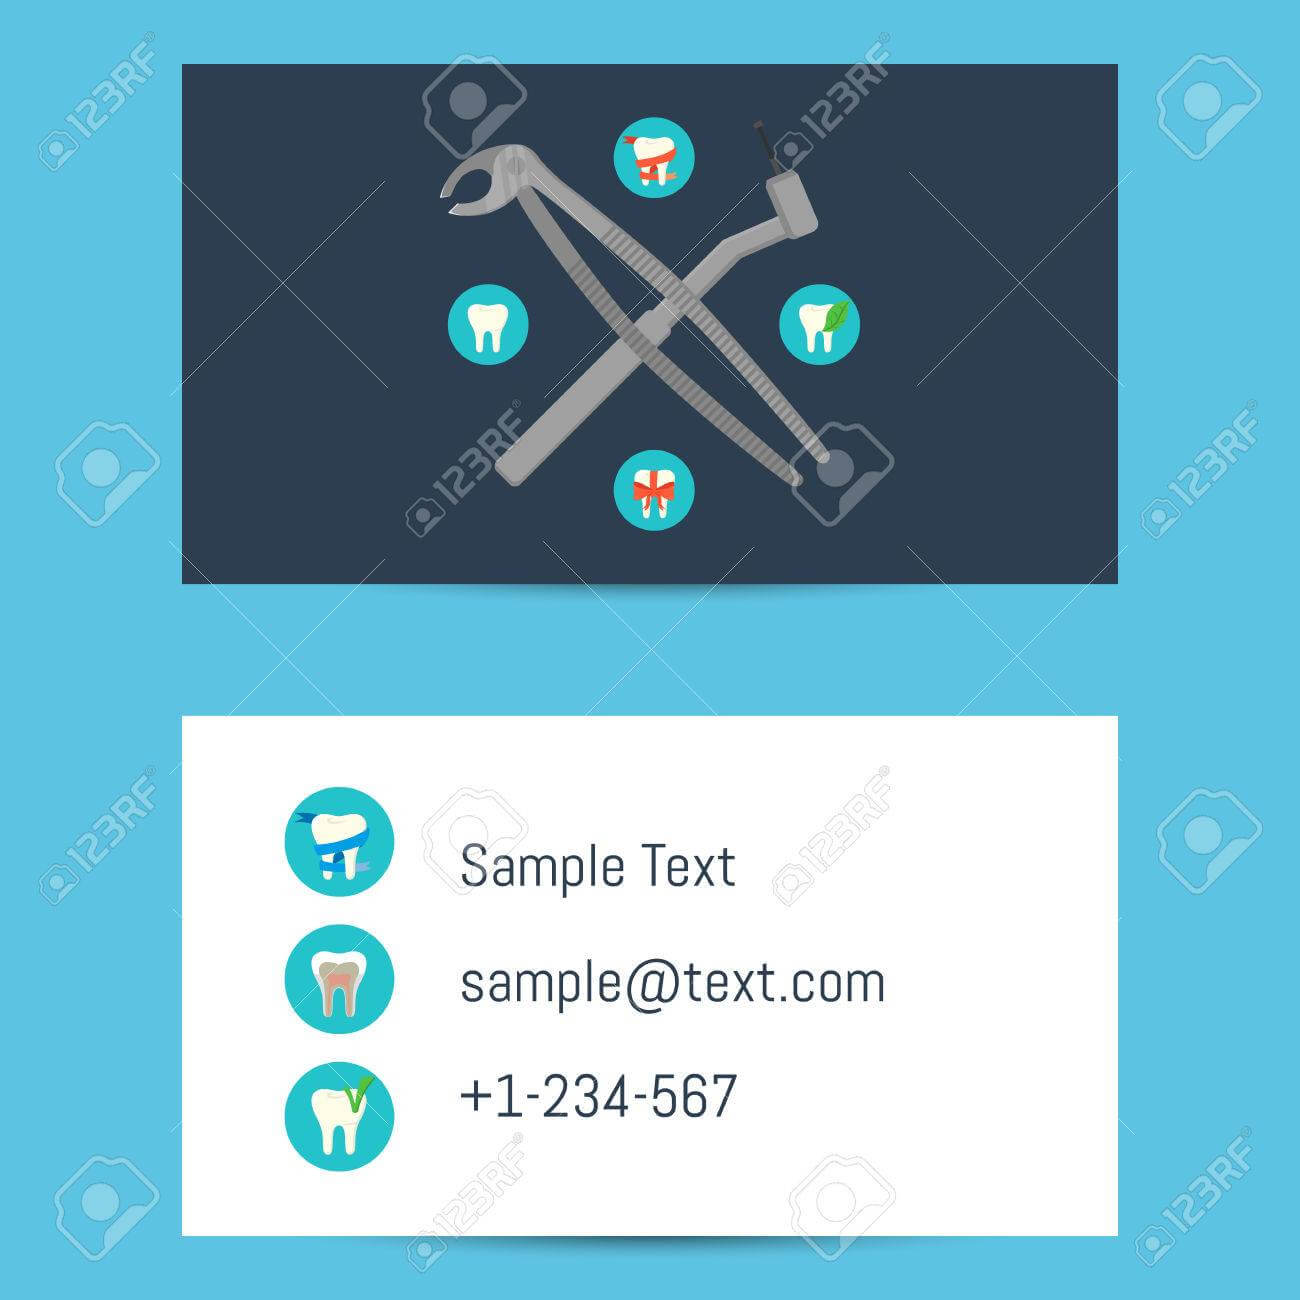 036 Office Business Card Template Ideas Phenomenal Open 8371 Regarding Office Max Business Card Template